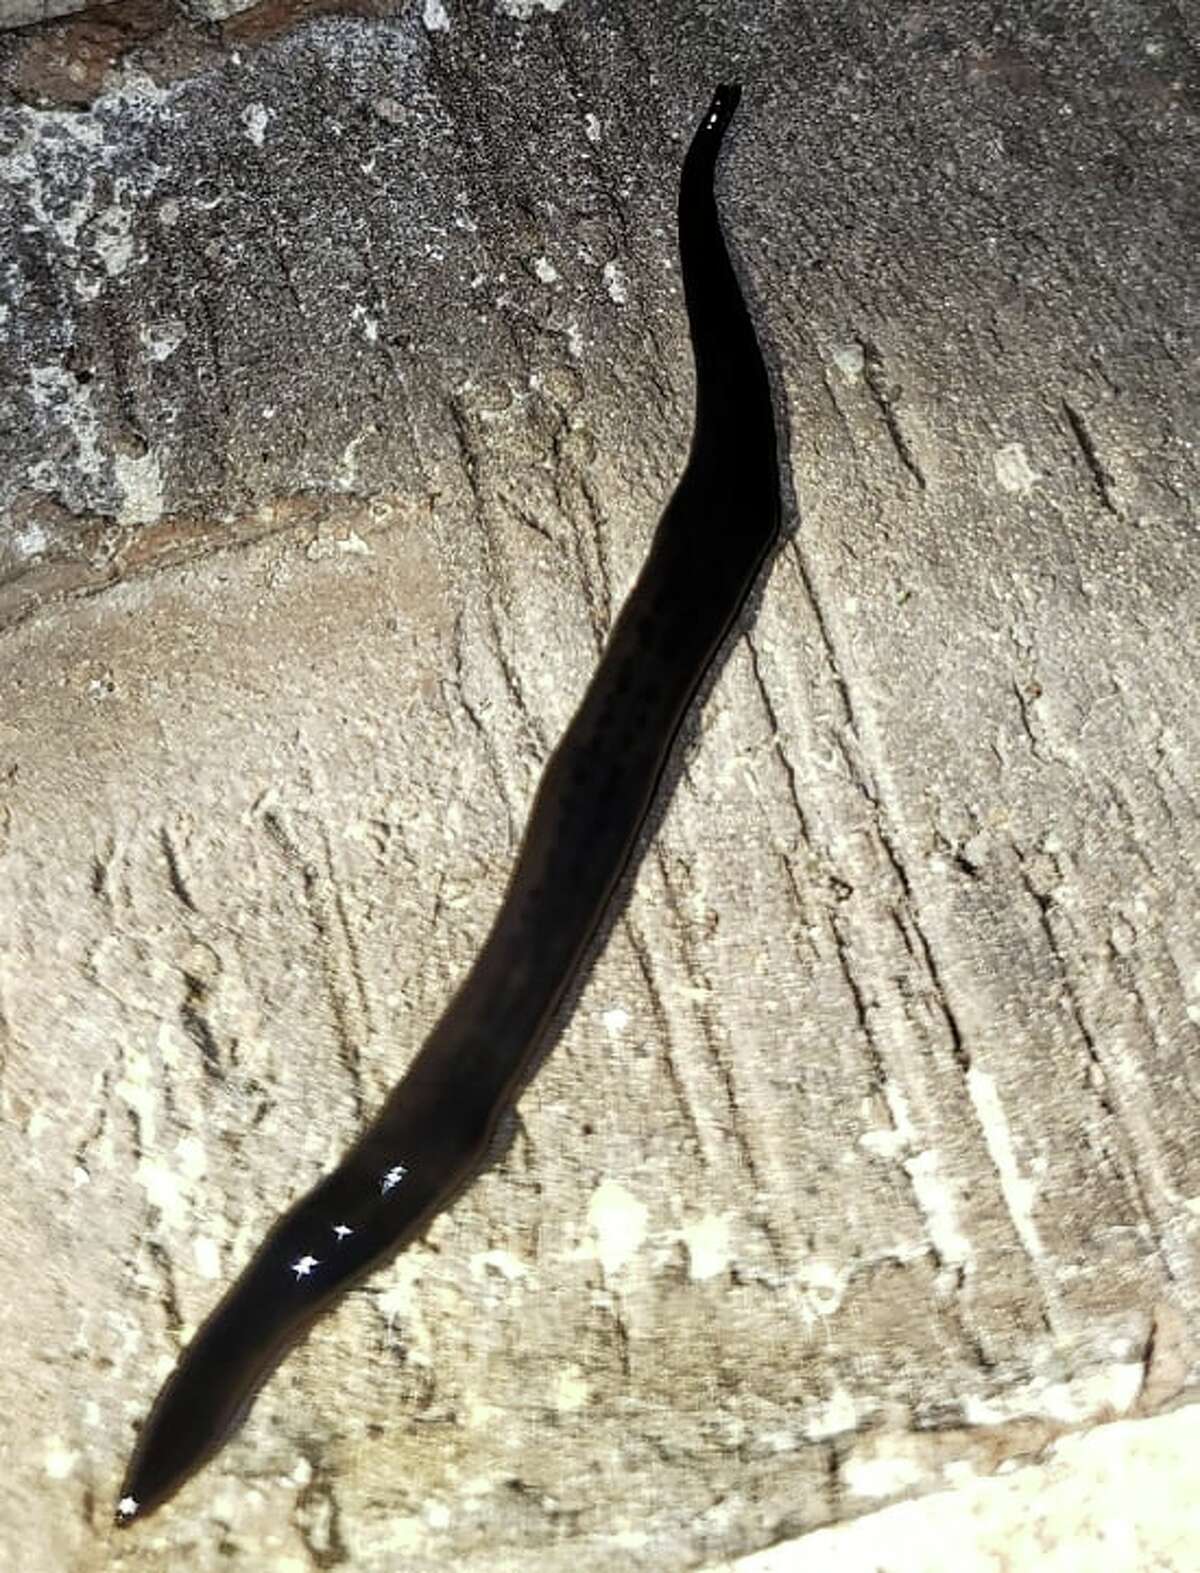 worm with a flat head